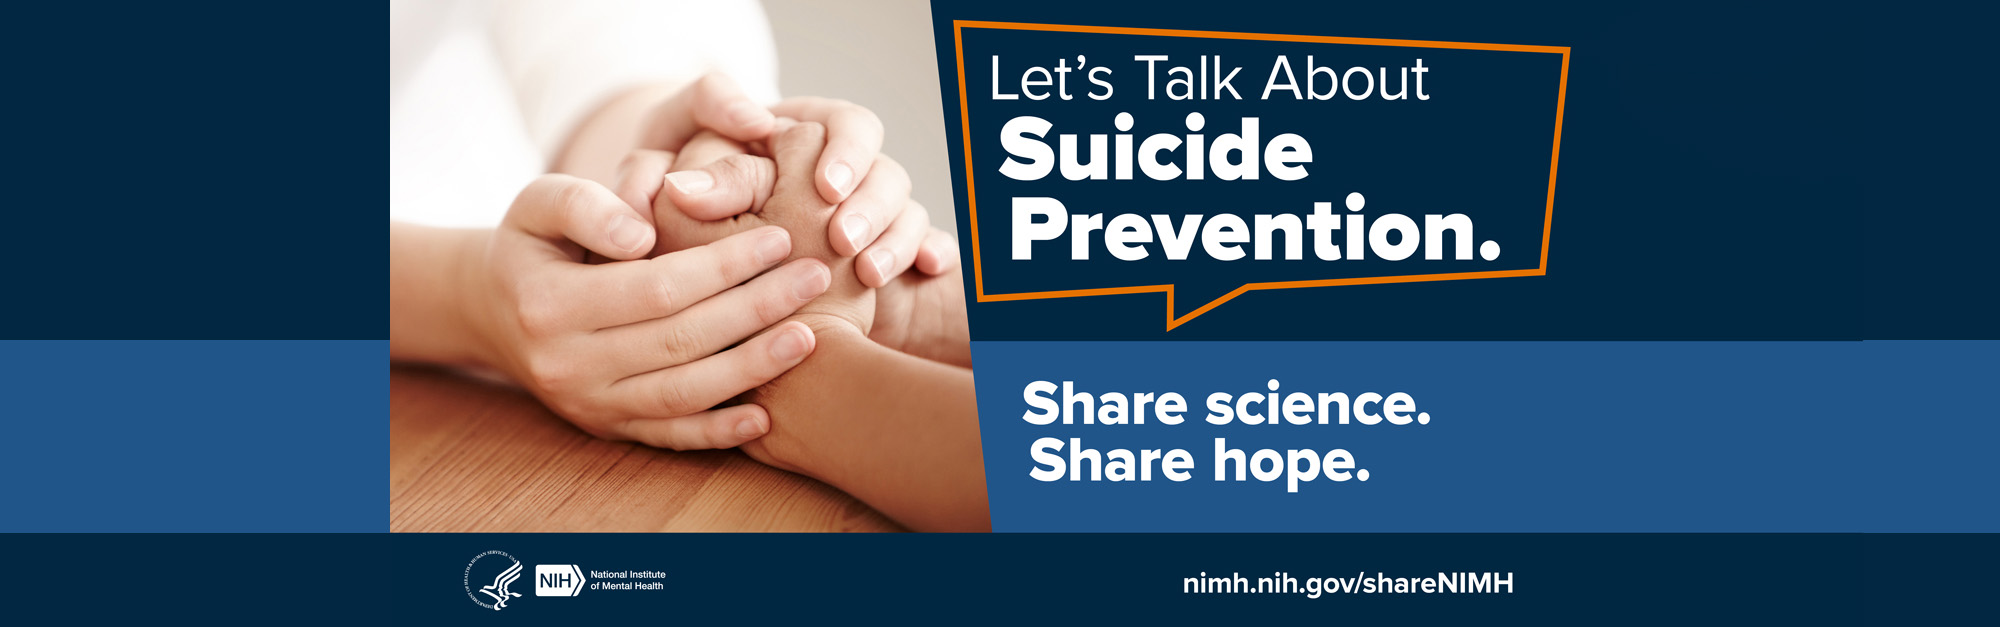 Lets Talk about Suicide Prevention banner with a person holding someones hand